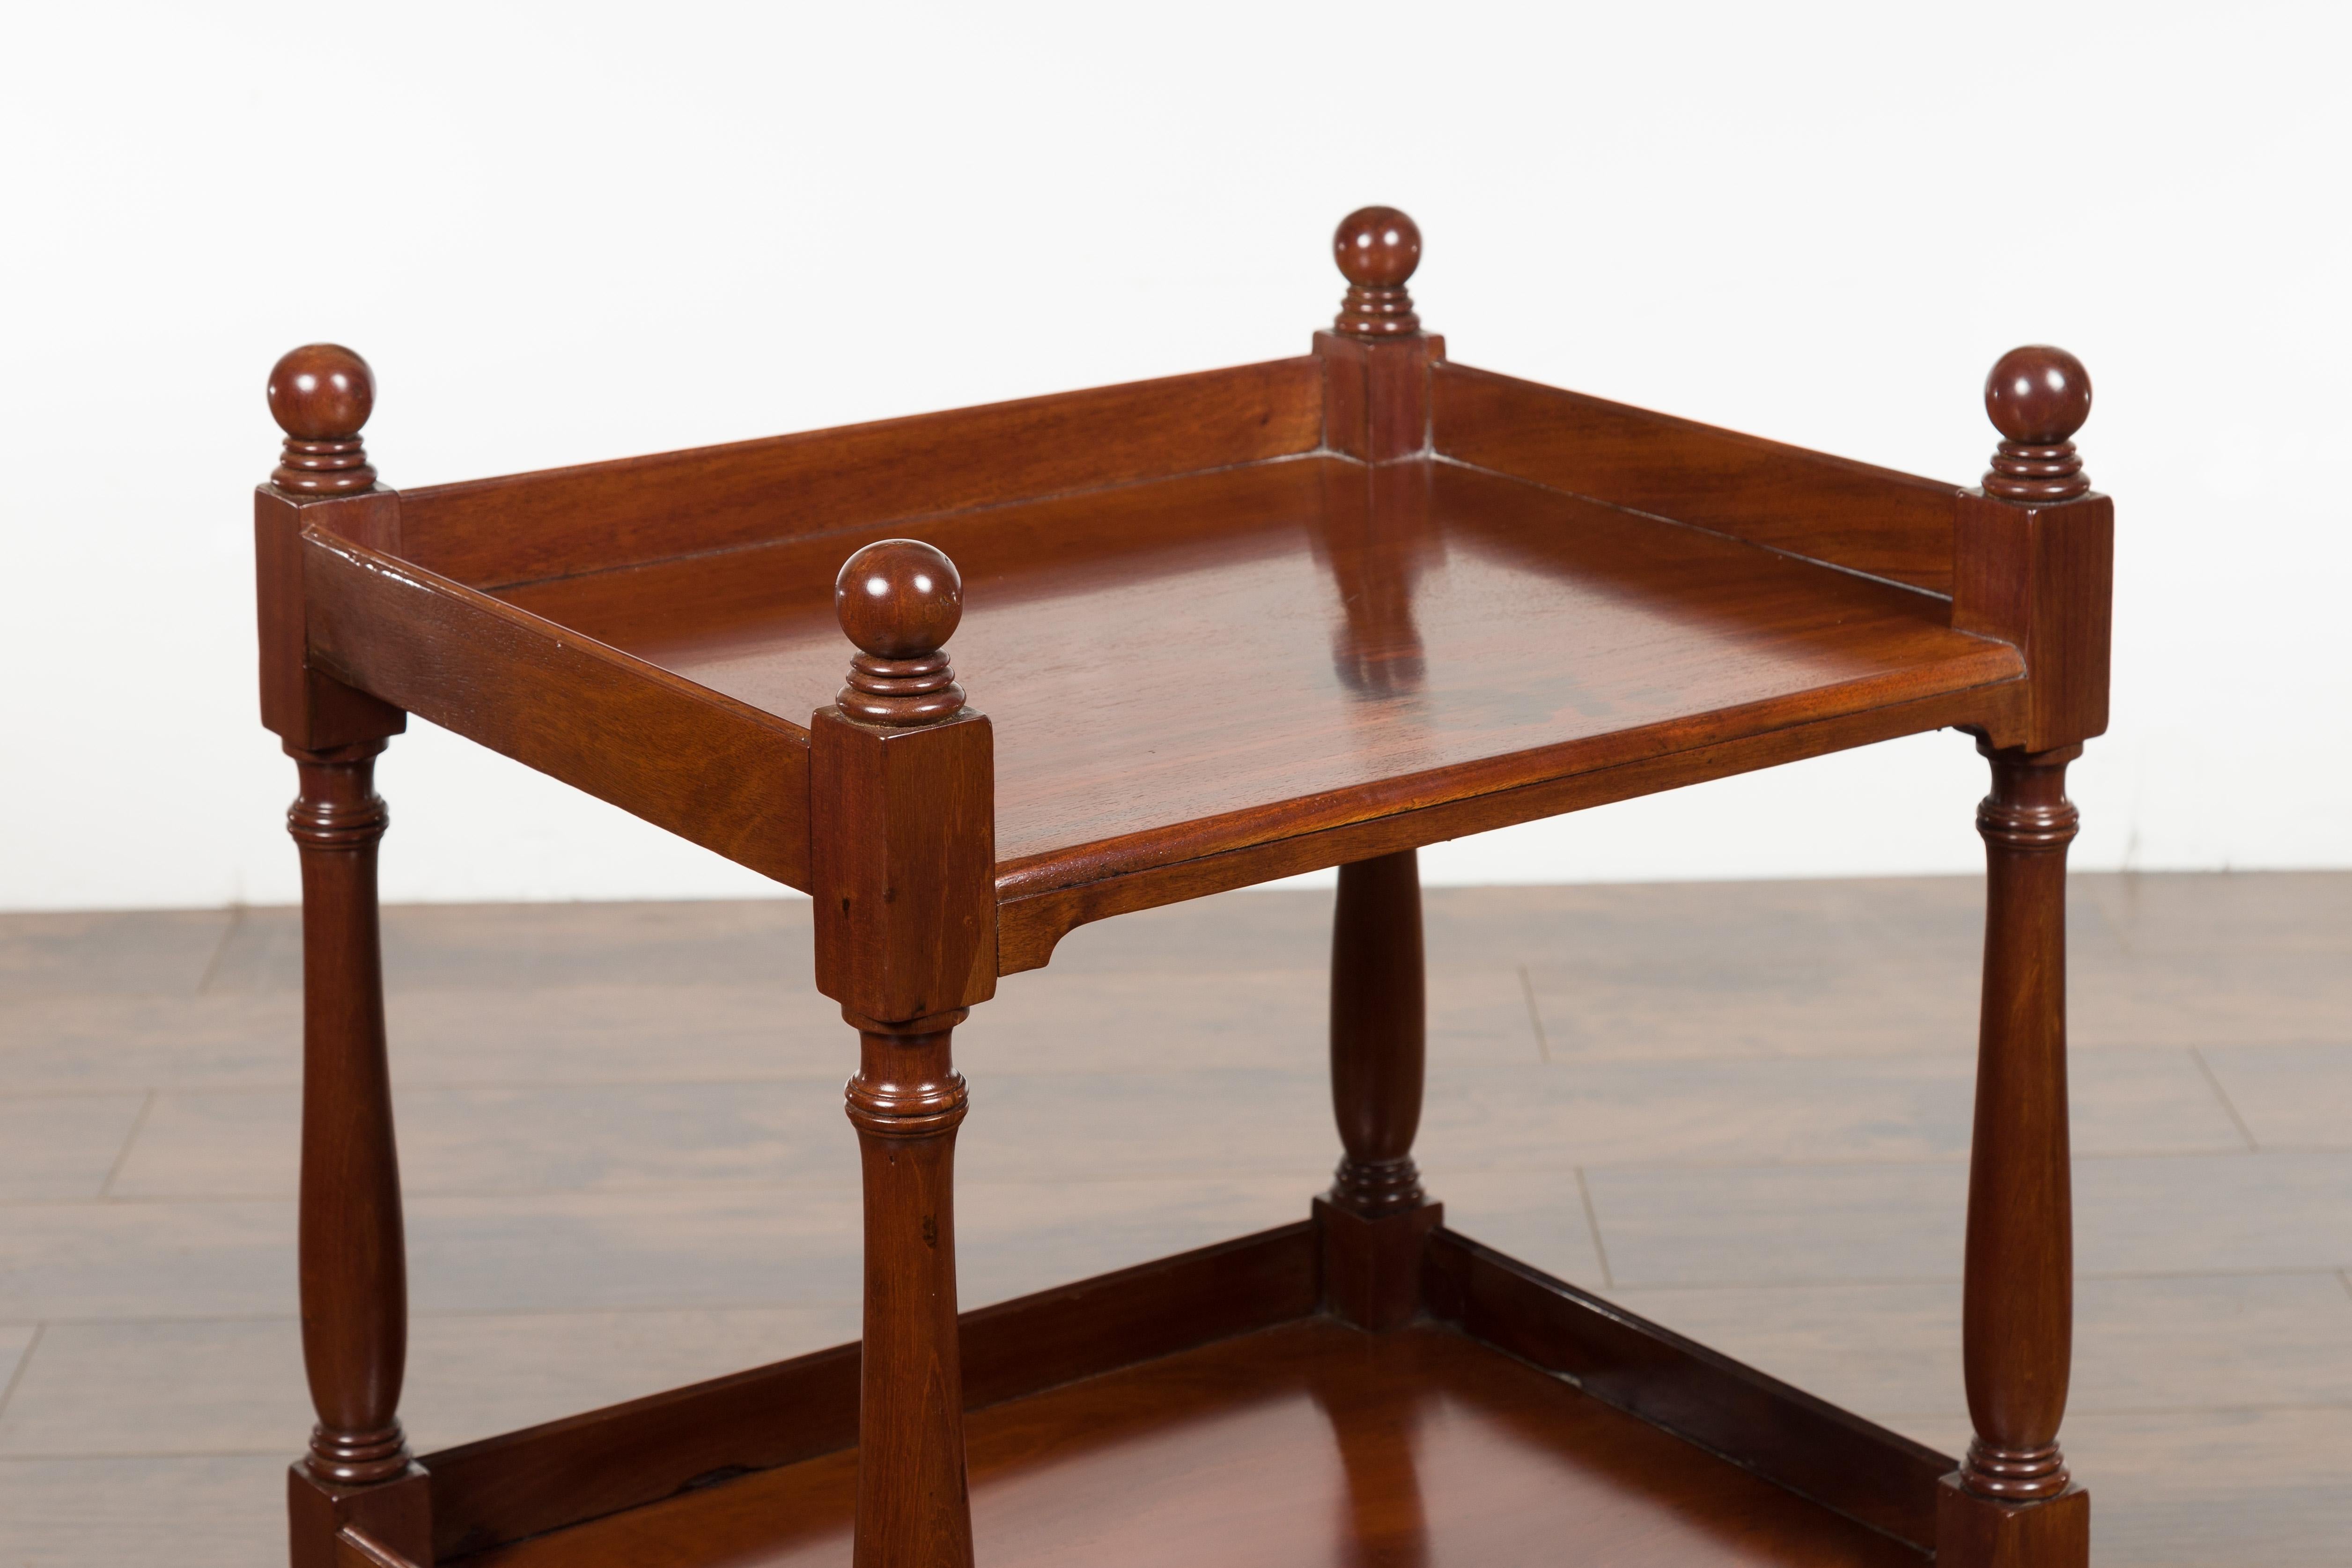 English 1870s Mahogany Tiered Table with Turned Legs and Low Shelf and Finials 7